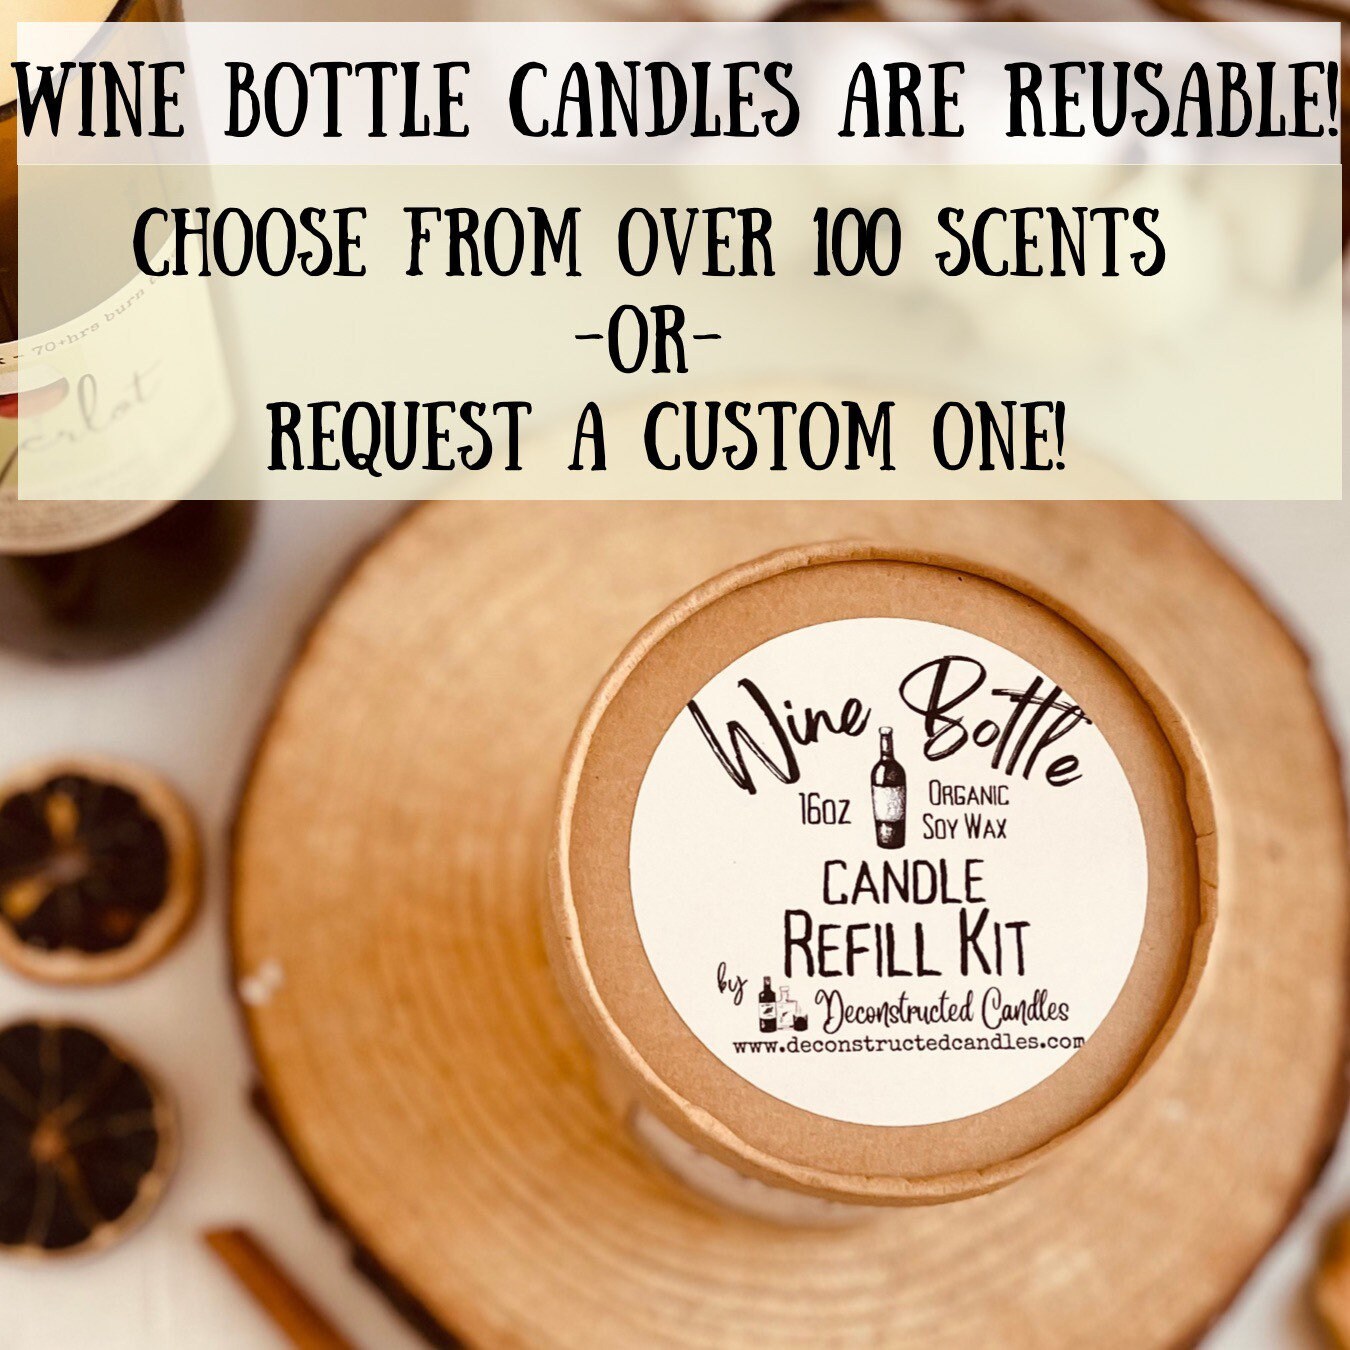 Candle Refill/dough Bowl Soy Candle/candle Refill Kit/organic/wood Bowl  Refills Kits/ Make Your Own Candle Kit/crafters Kit/christmas 